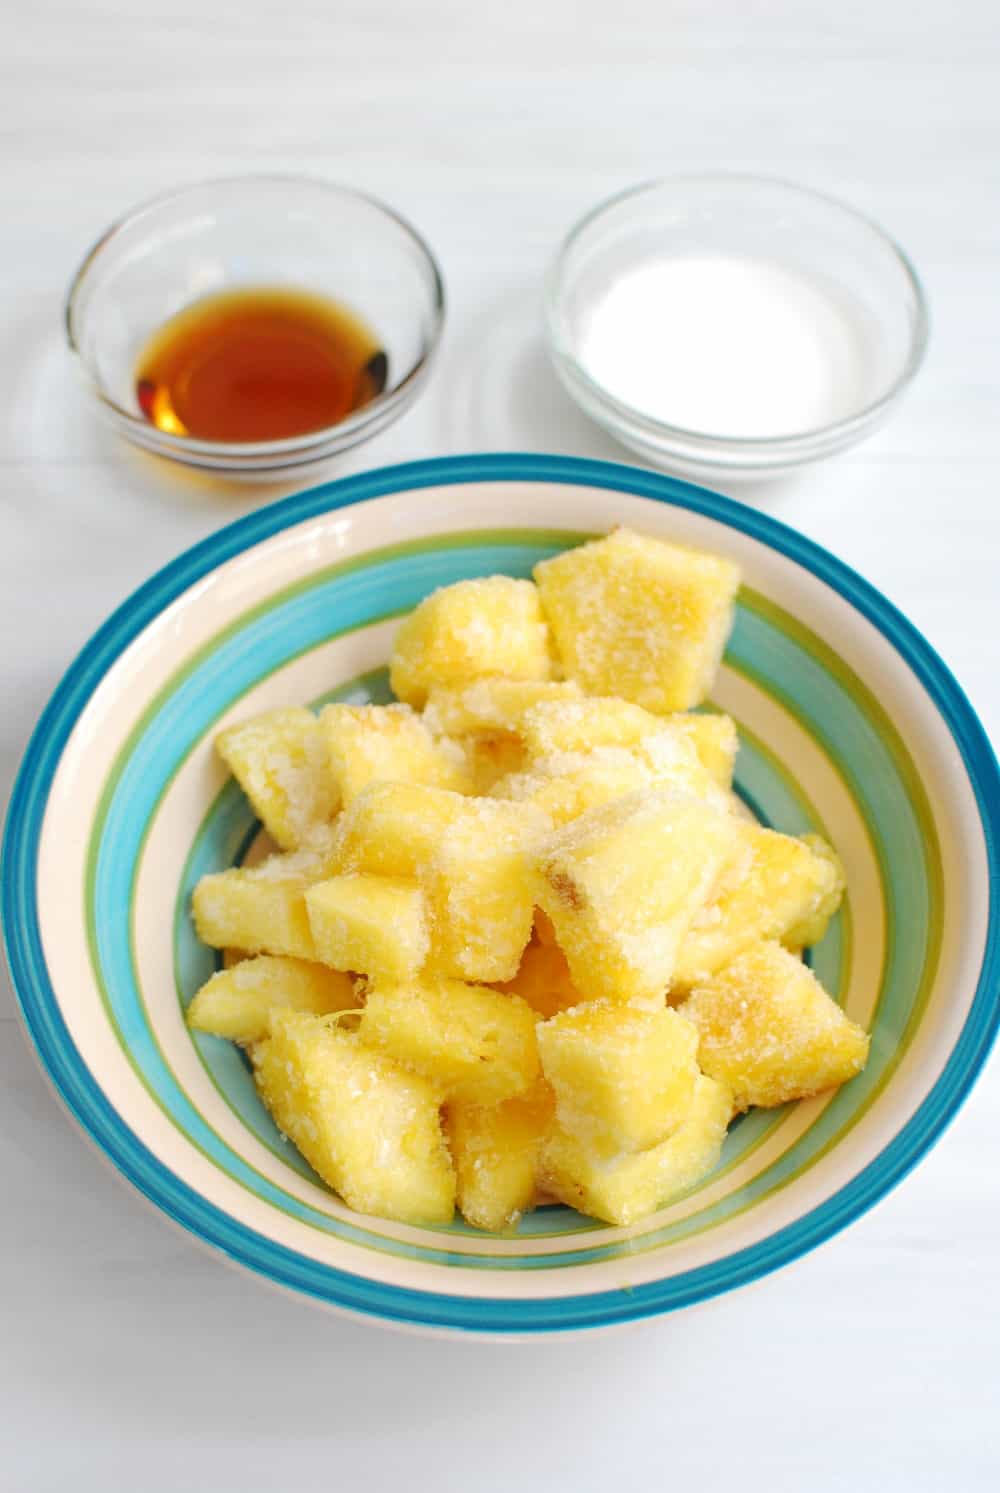 All the ingredients needed to make homemade pineapple ice cream